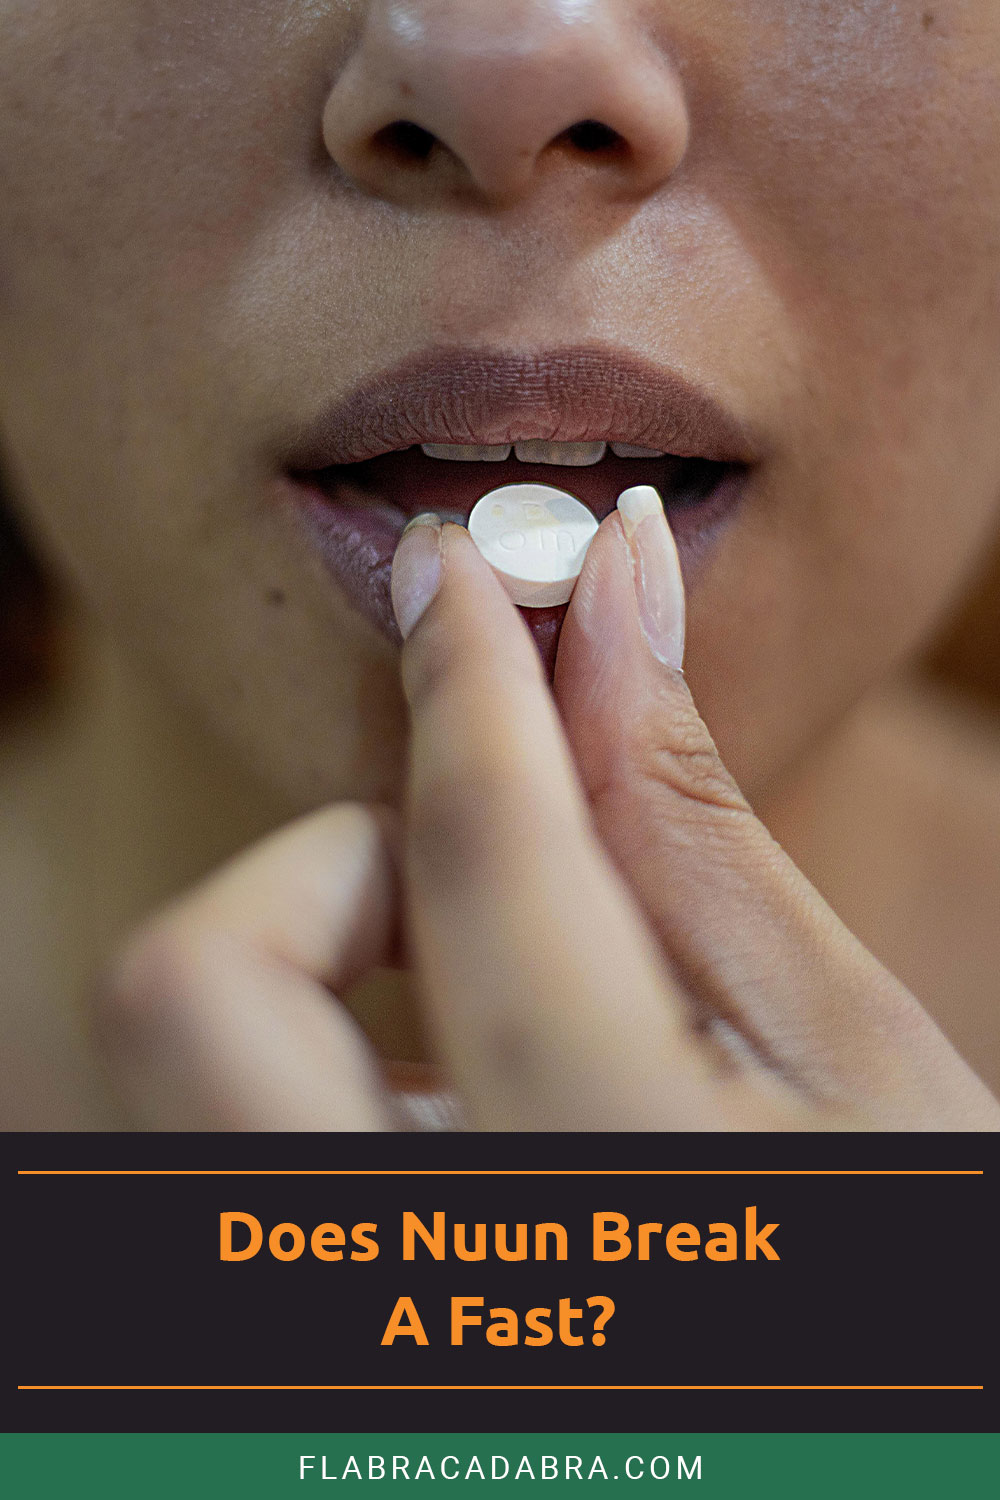 Woman putting white pill in her mouth - Does Nuun Break A Fast?